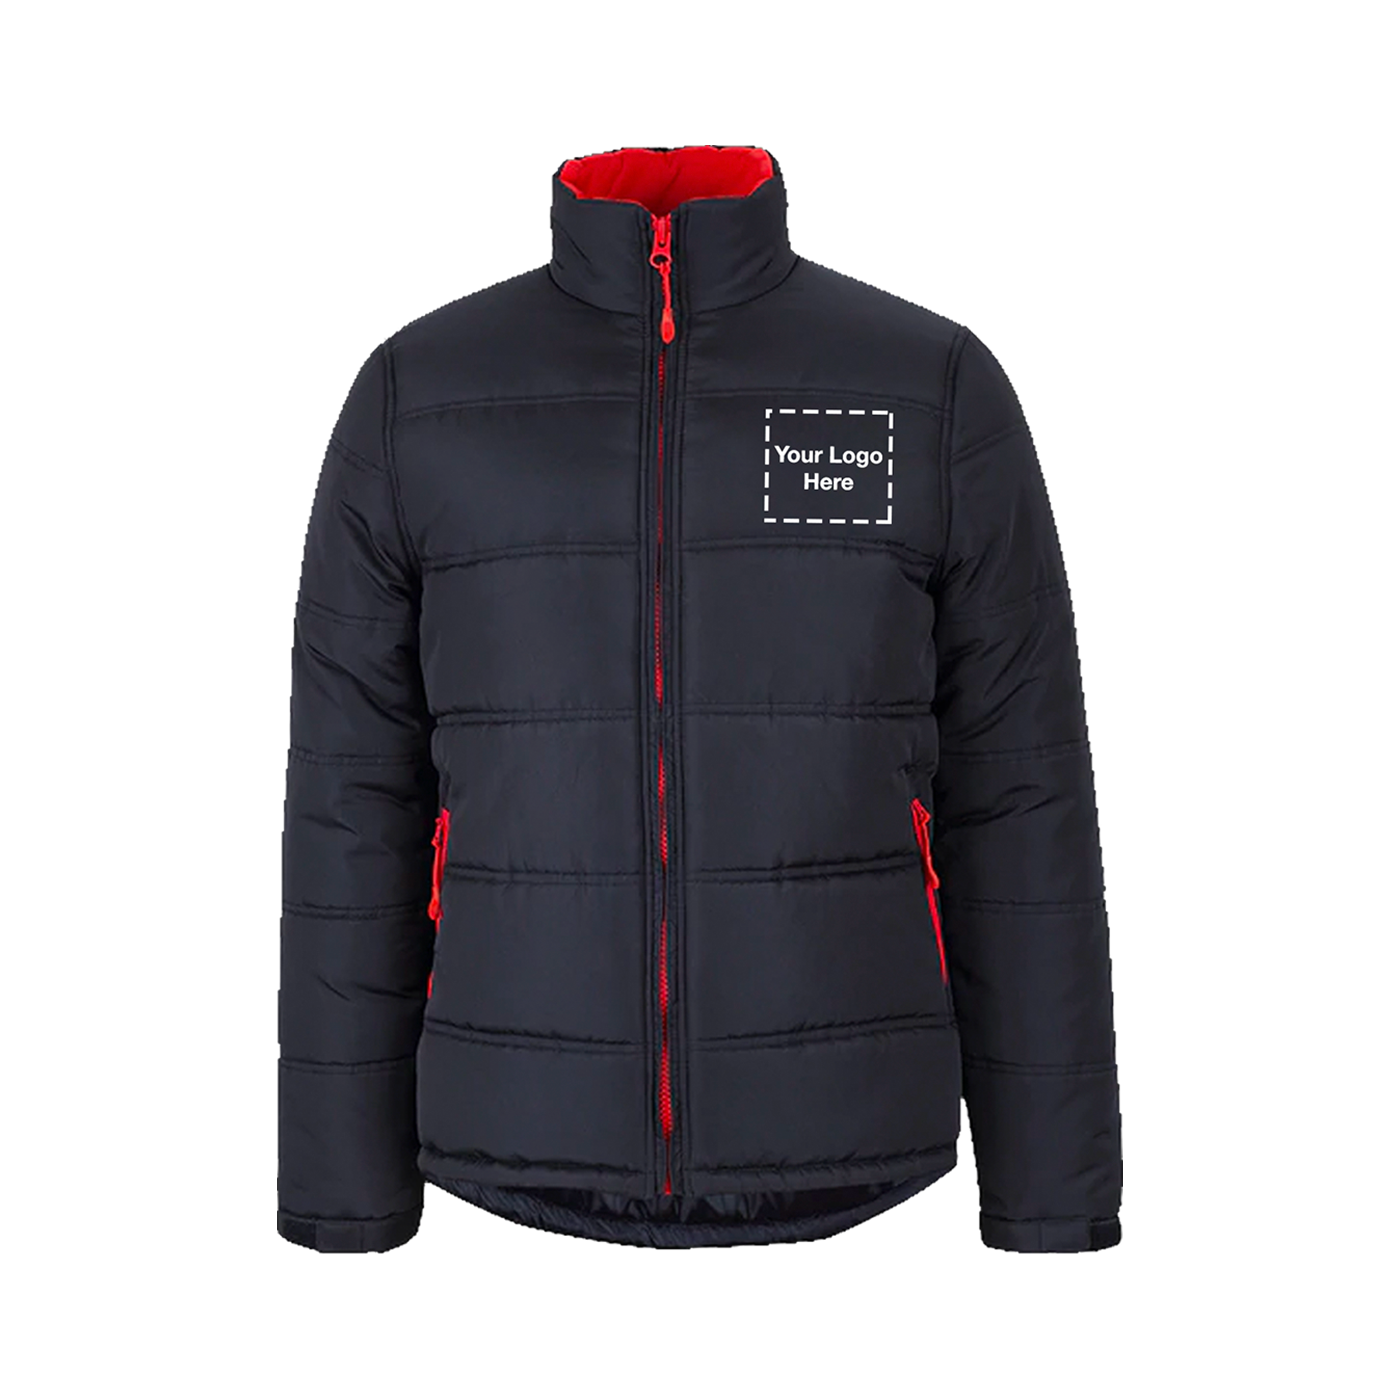 Co-branded Puffer Contrast Jacket